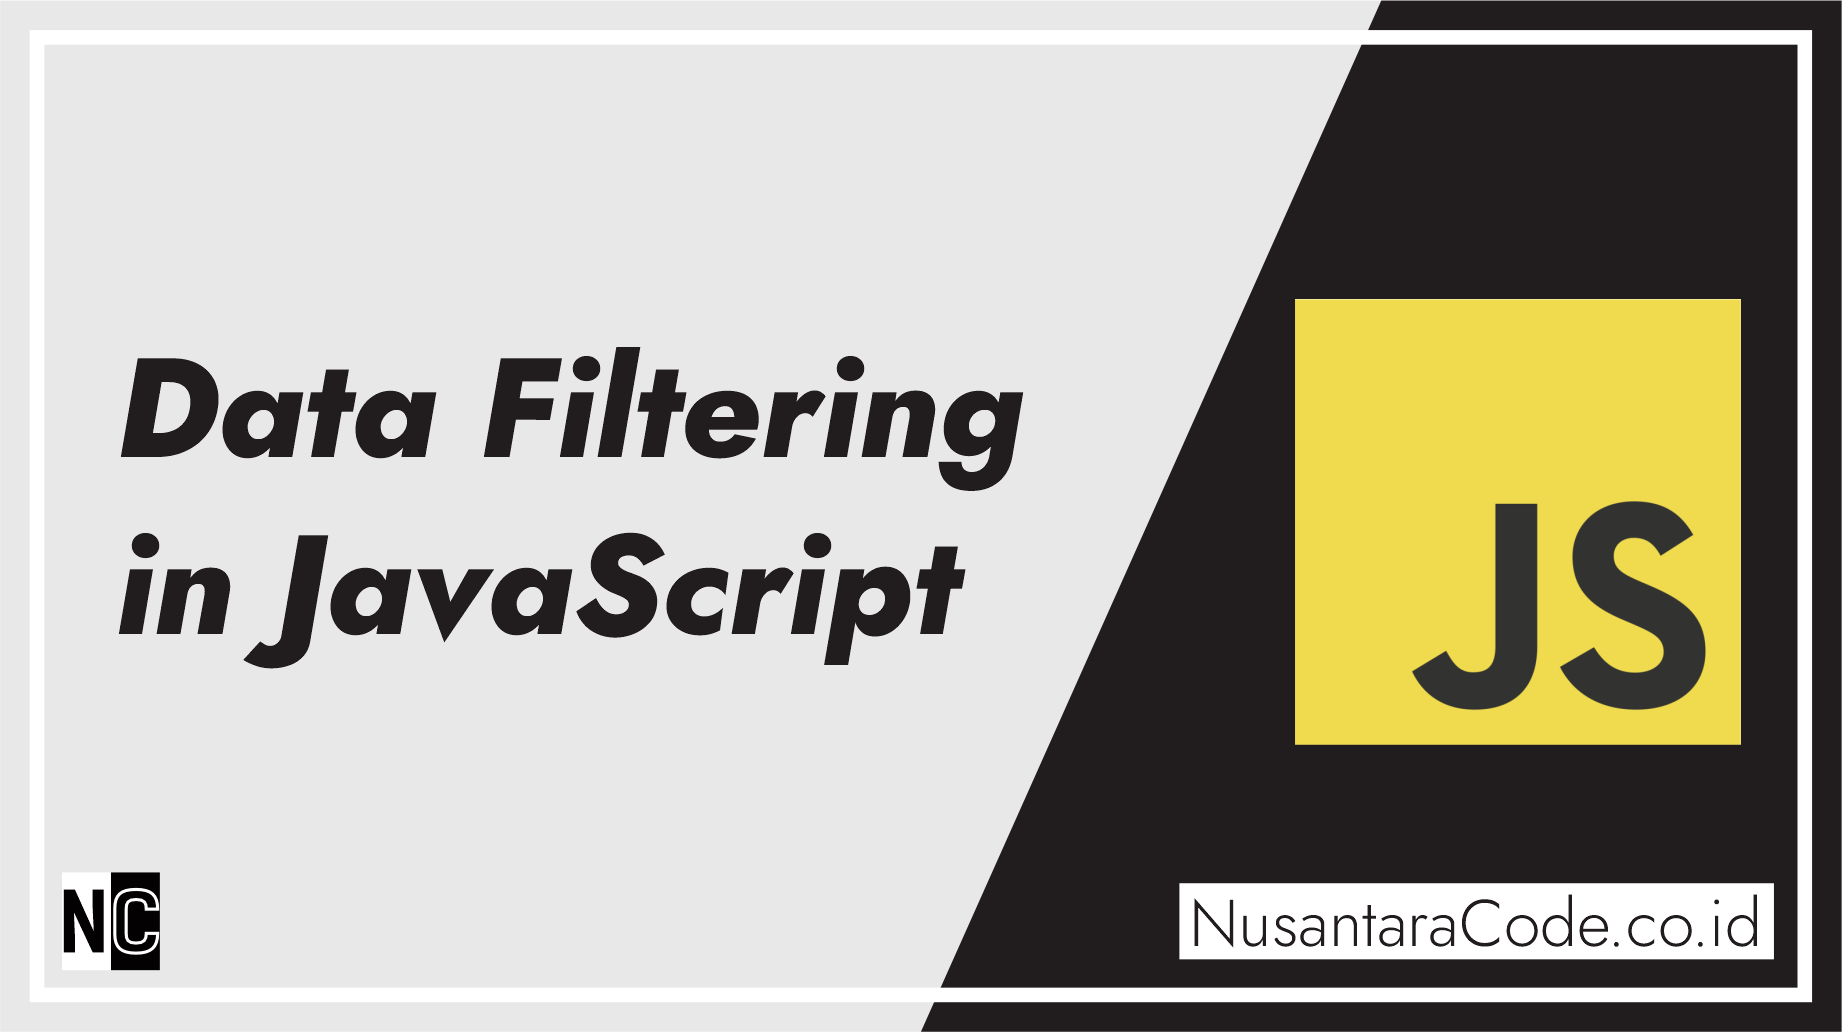 Data Filtering in JavaScript: Numbers, Emails, Letters, URLs/Domains